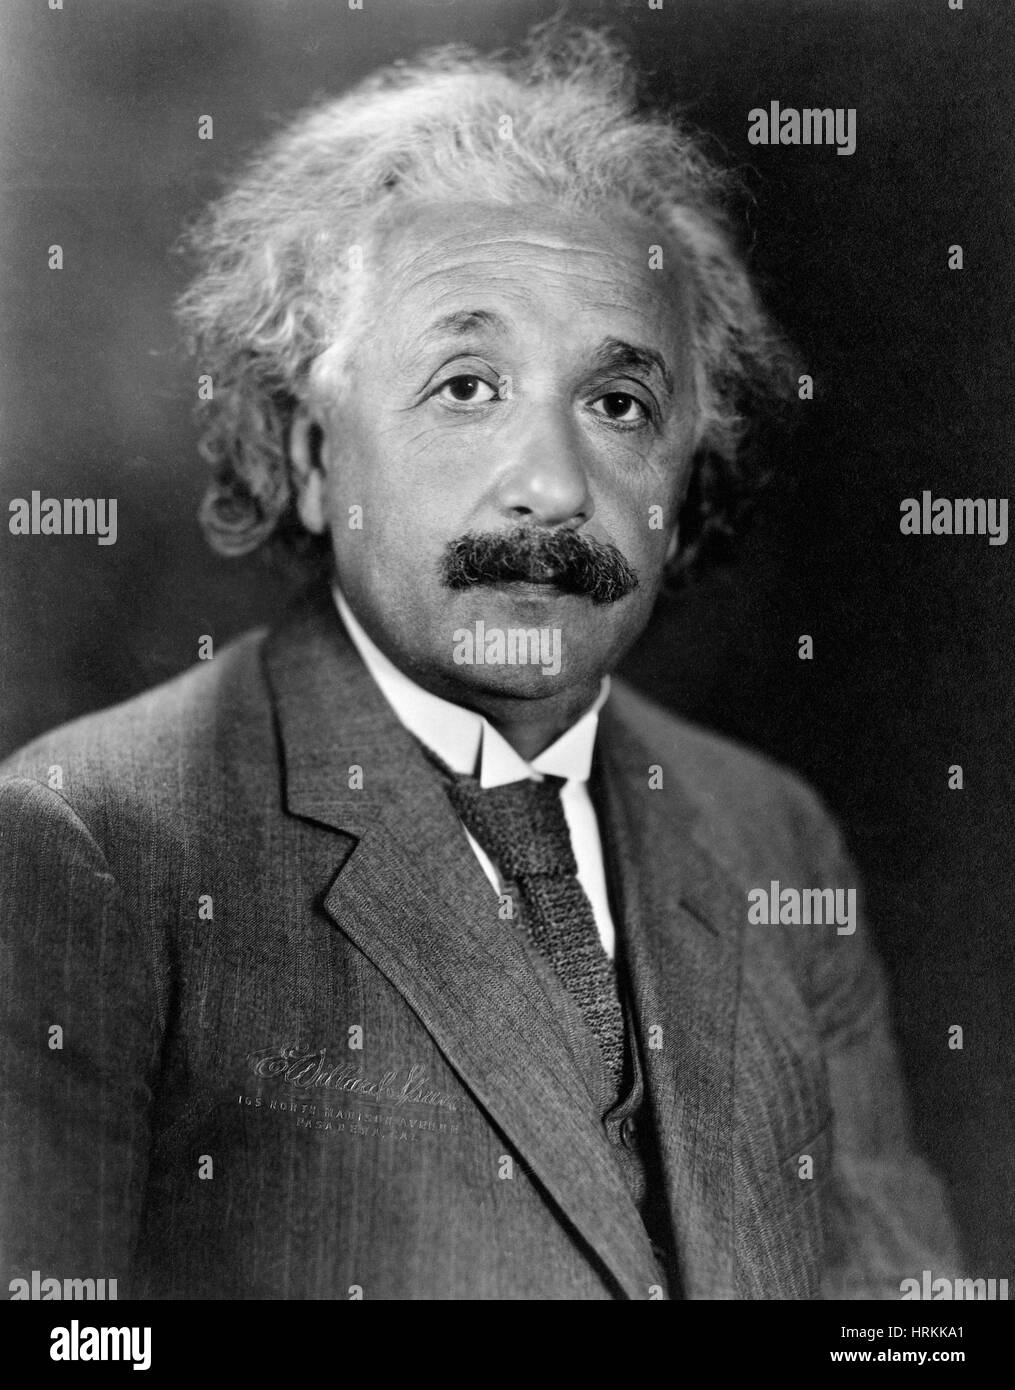 Albert einstein hi-res stock photography and images - Alamy